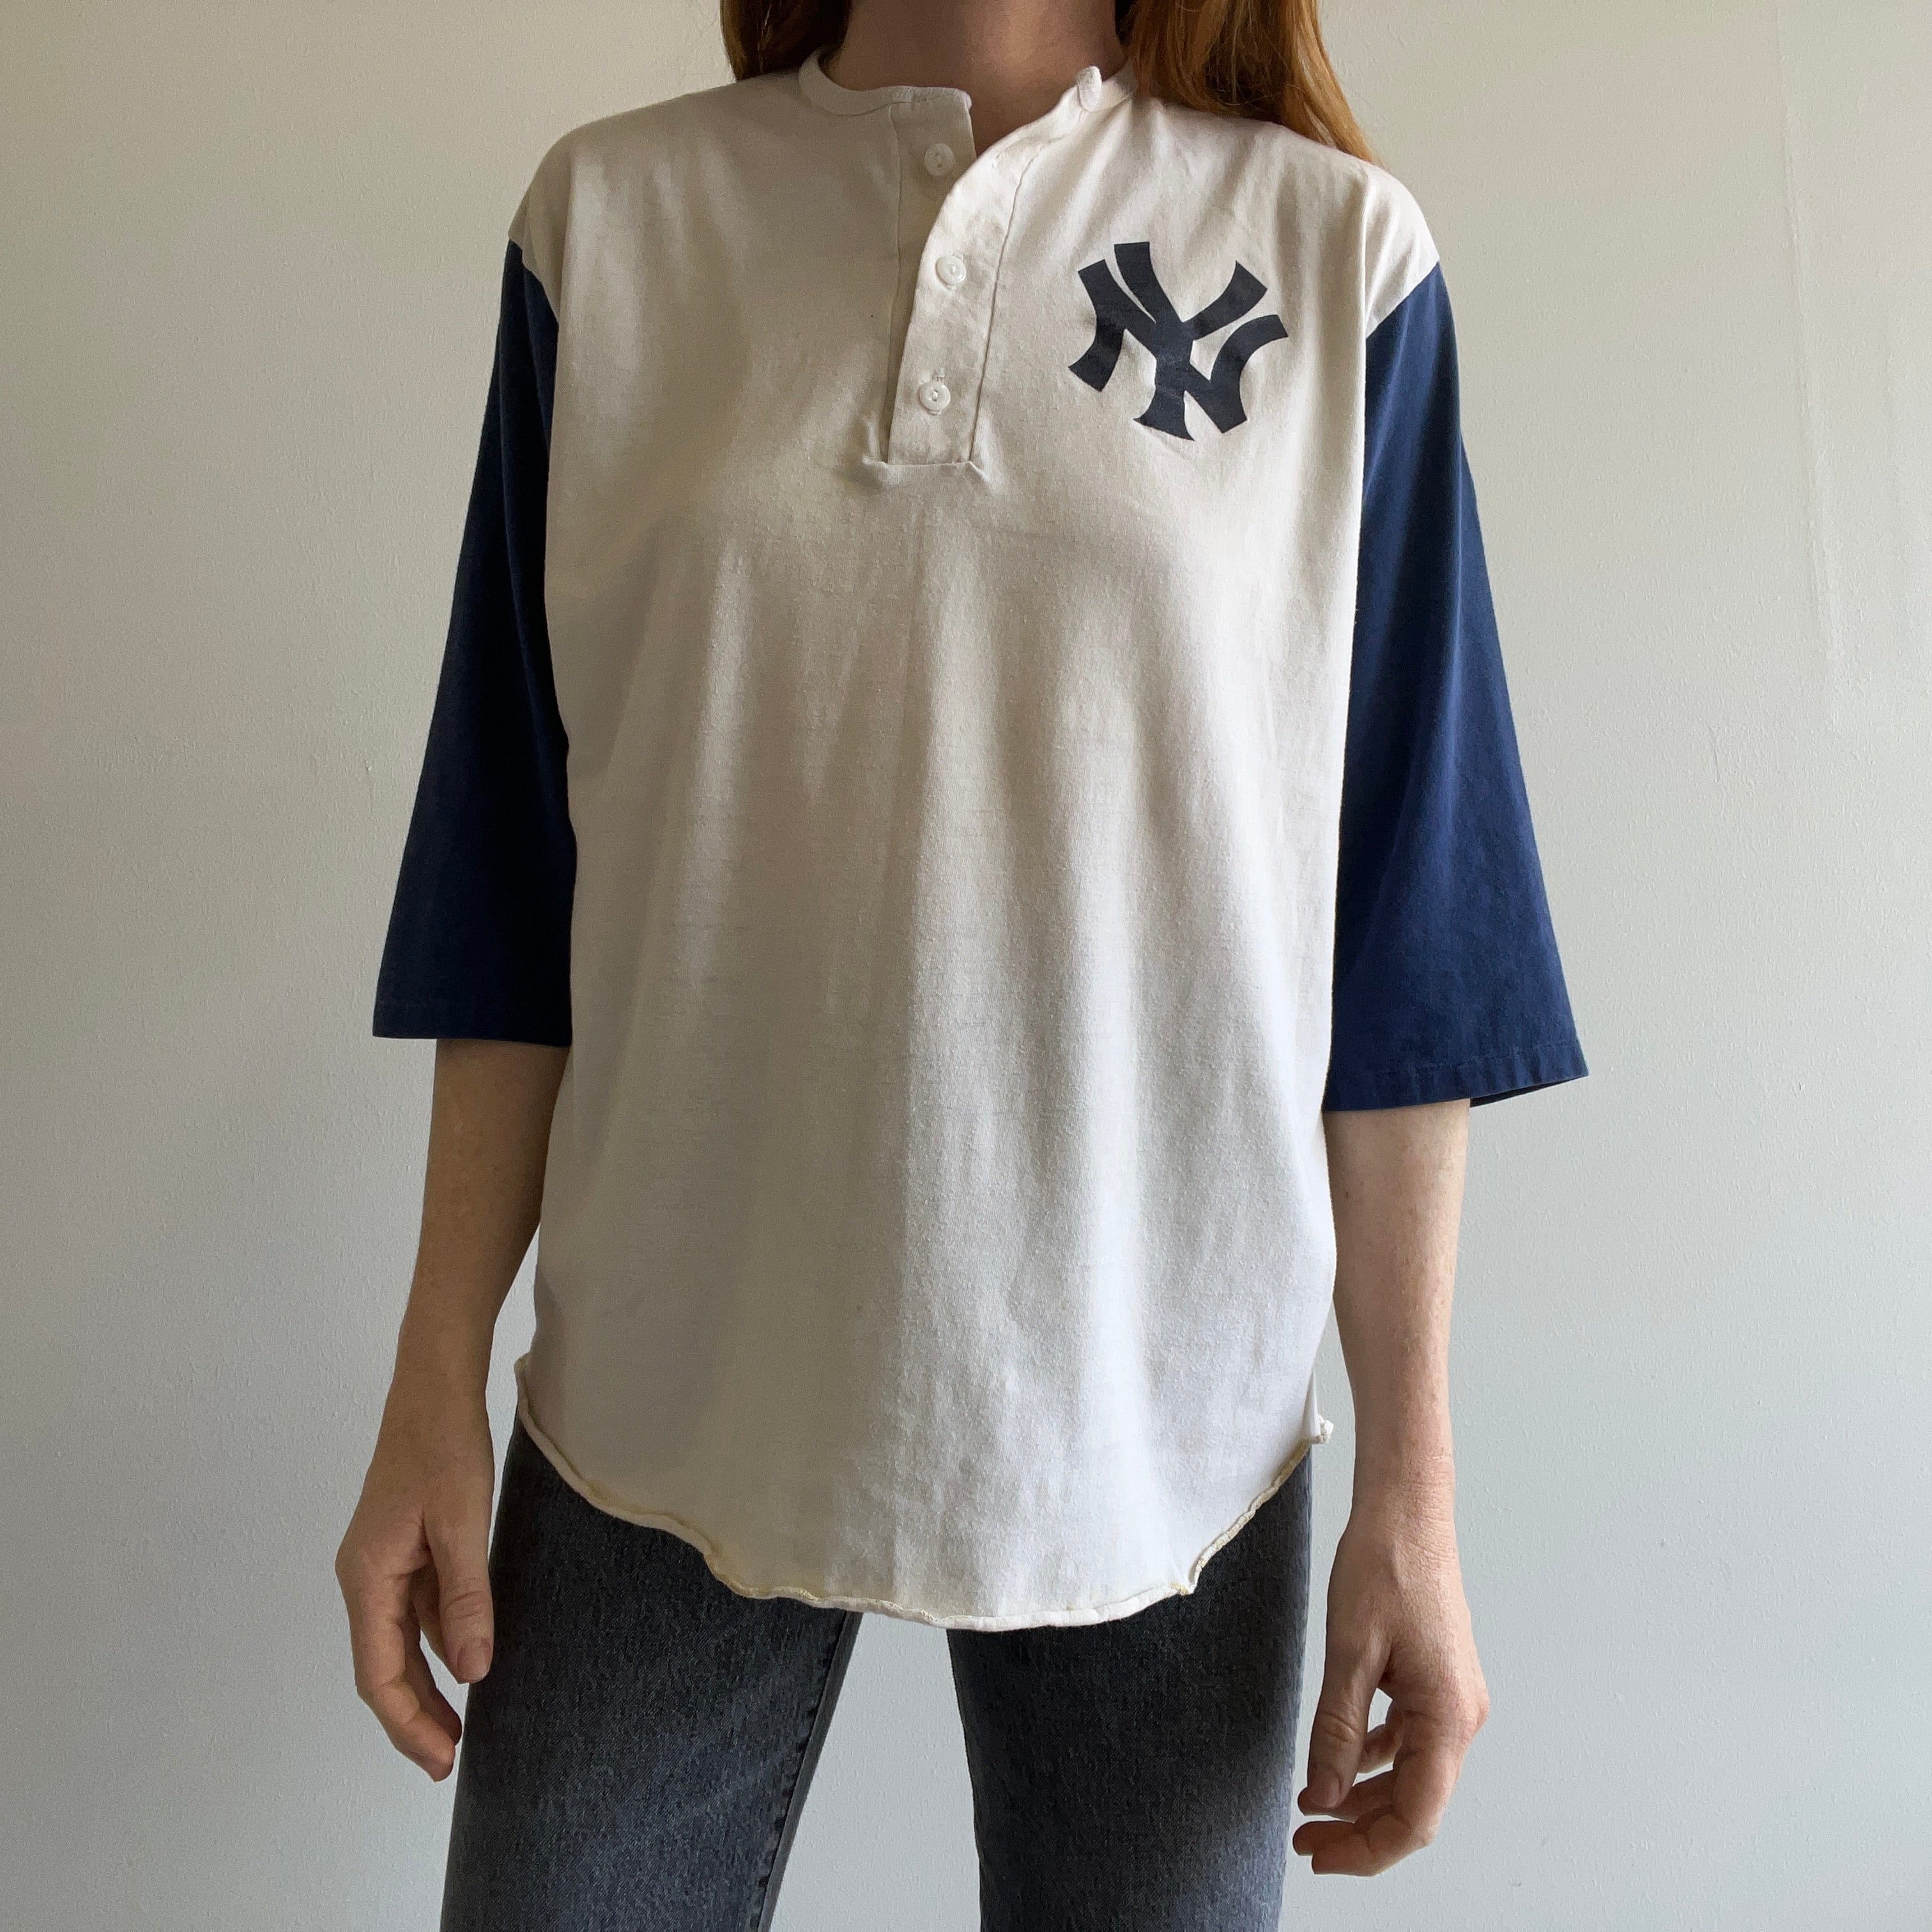 1970s New York Yankees Baseball T-Shirt (Go Dodgers!! Sorry, Had To)